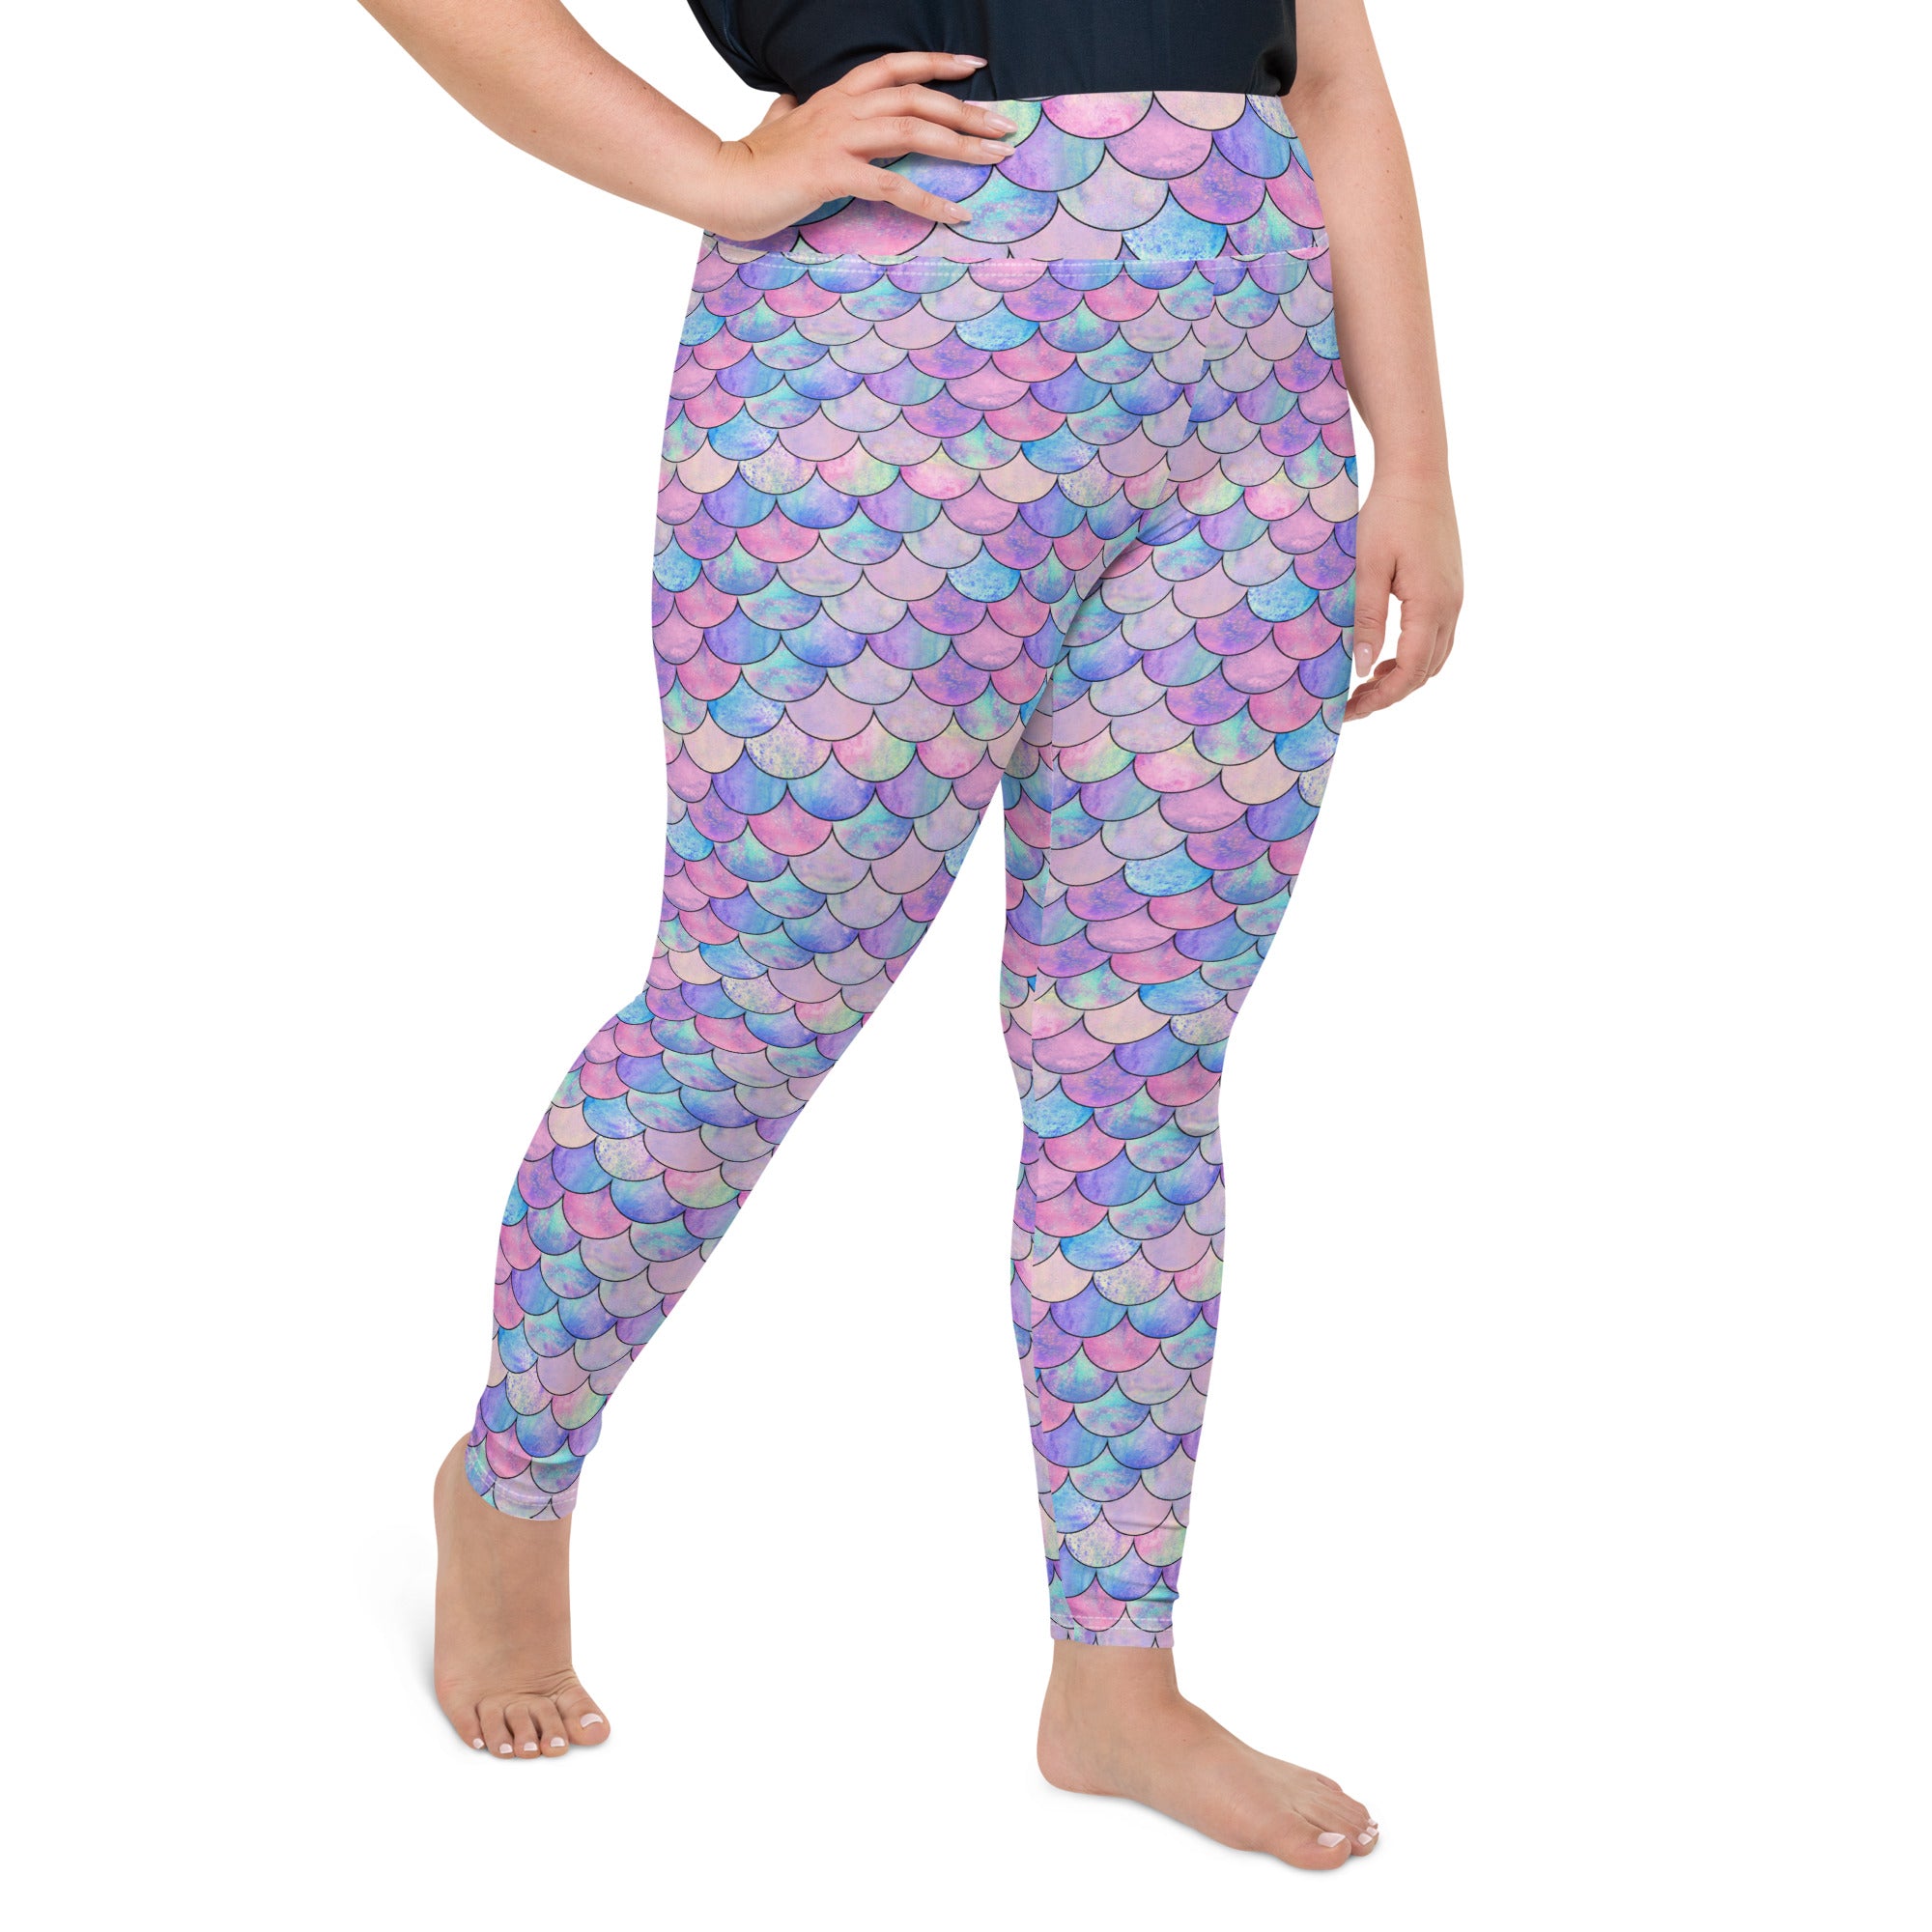 Plus Size Super Soft Tropical Printed Leggings One Size Fits Most